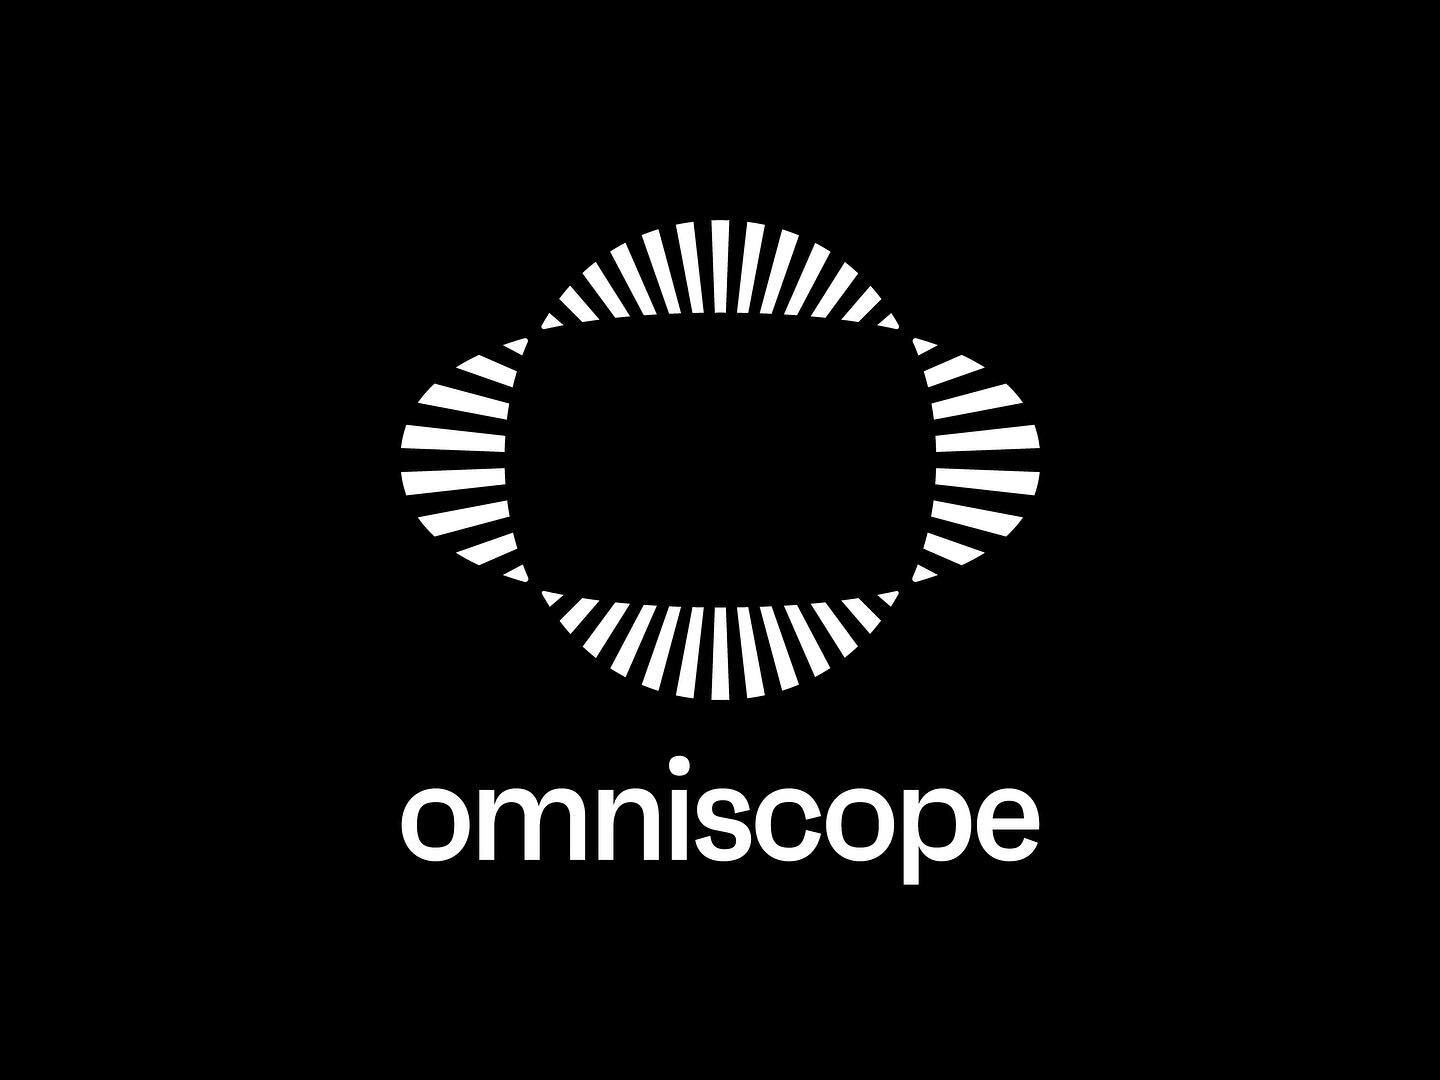 We helped biotech startup Omniscope define what they stand for with a simple idea that moves and unites people &mdash; science is we all. The new identity is bright, hopeful, human and driven. 

Omniscope is our first global brand, active in Spain, M